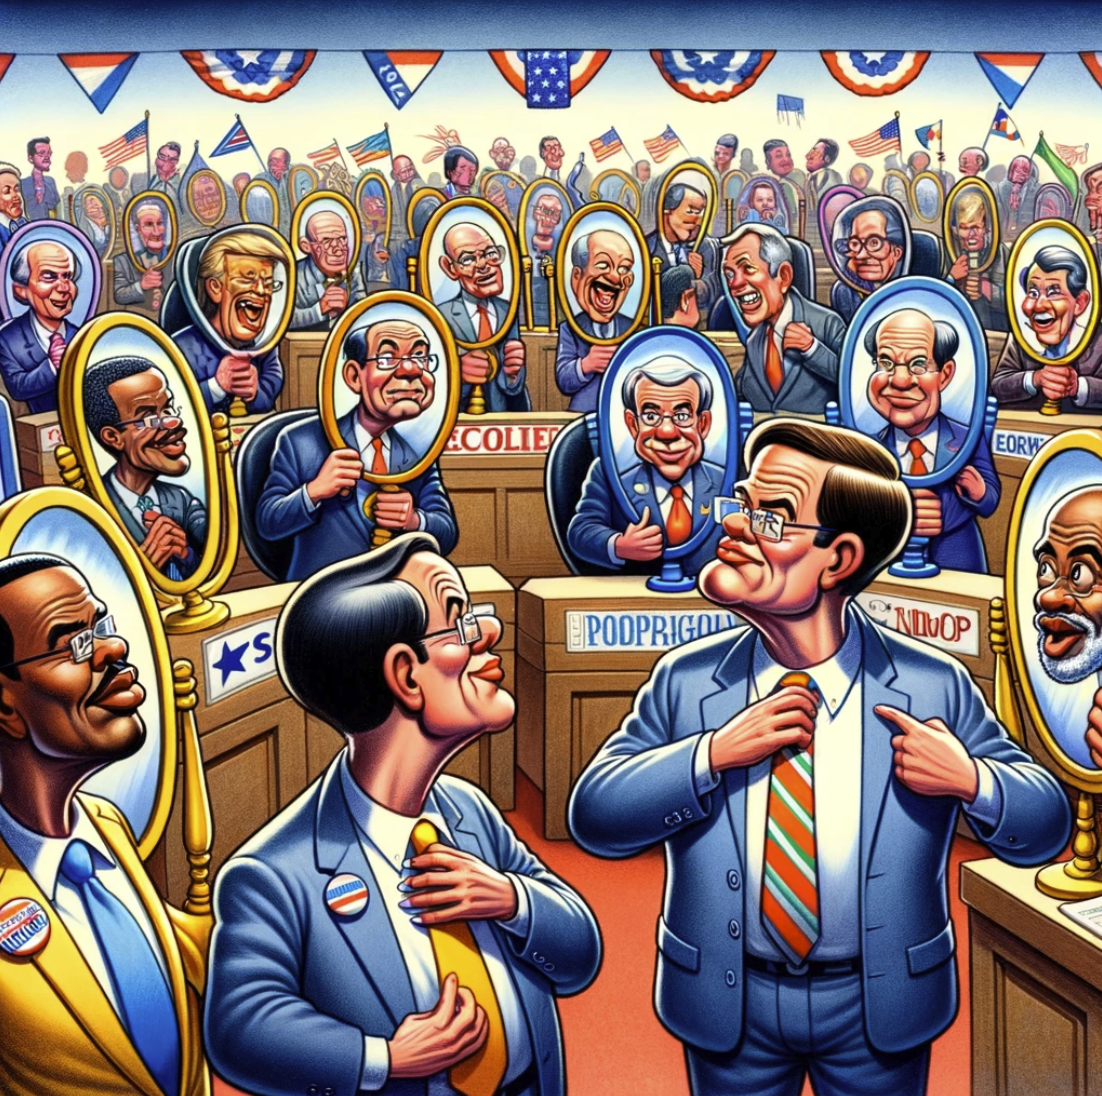 satirical cartoon depicting various politicians looking into mirrors, symbolizing narcissism on a political debate stage